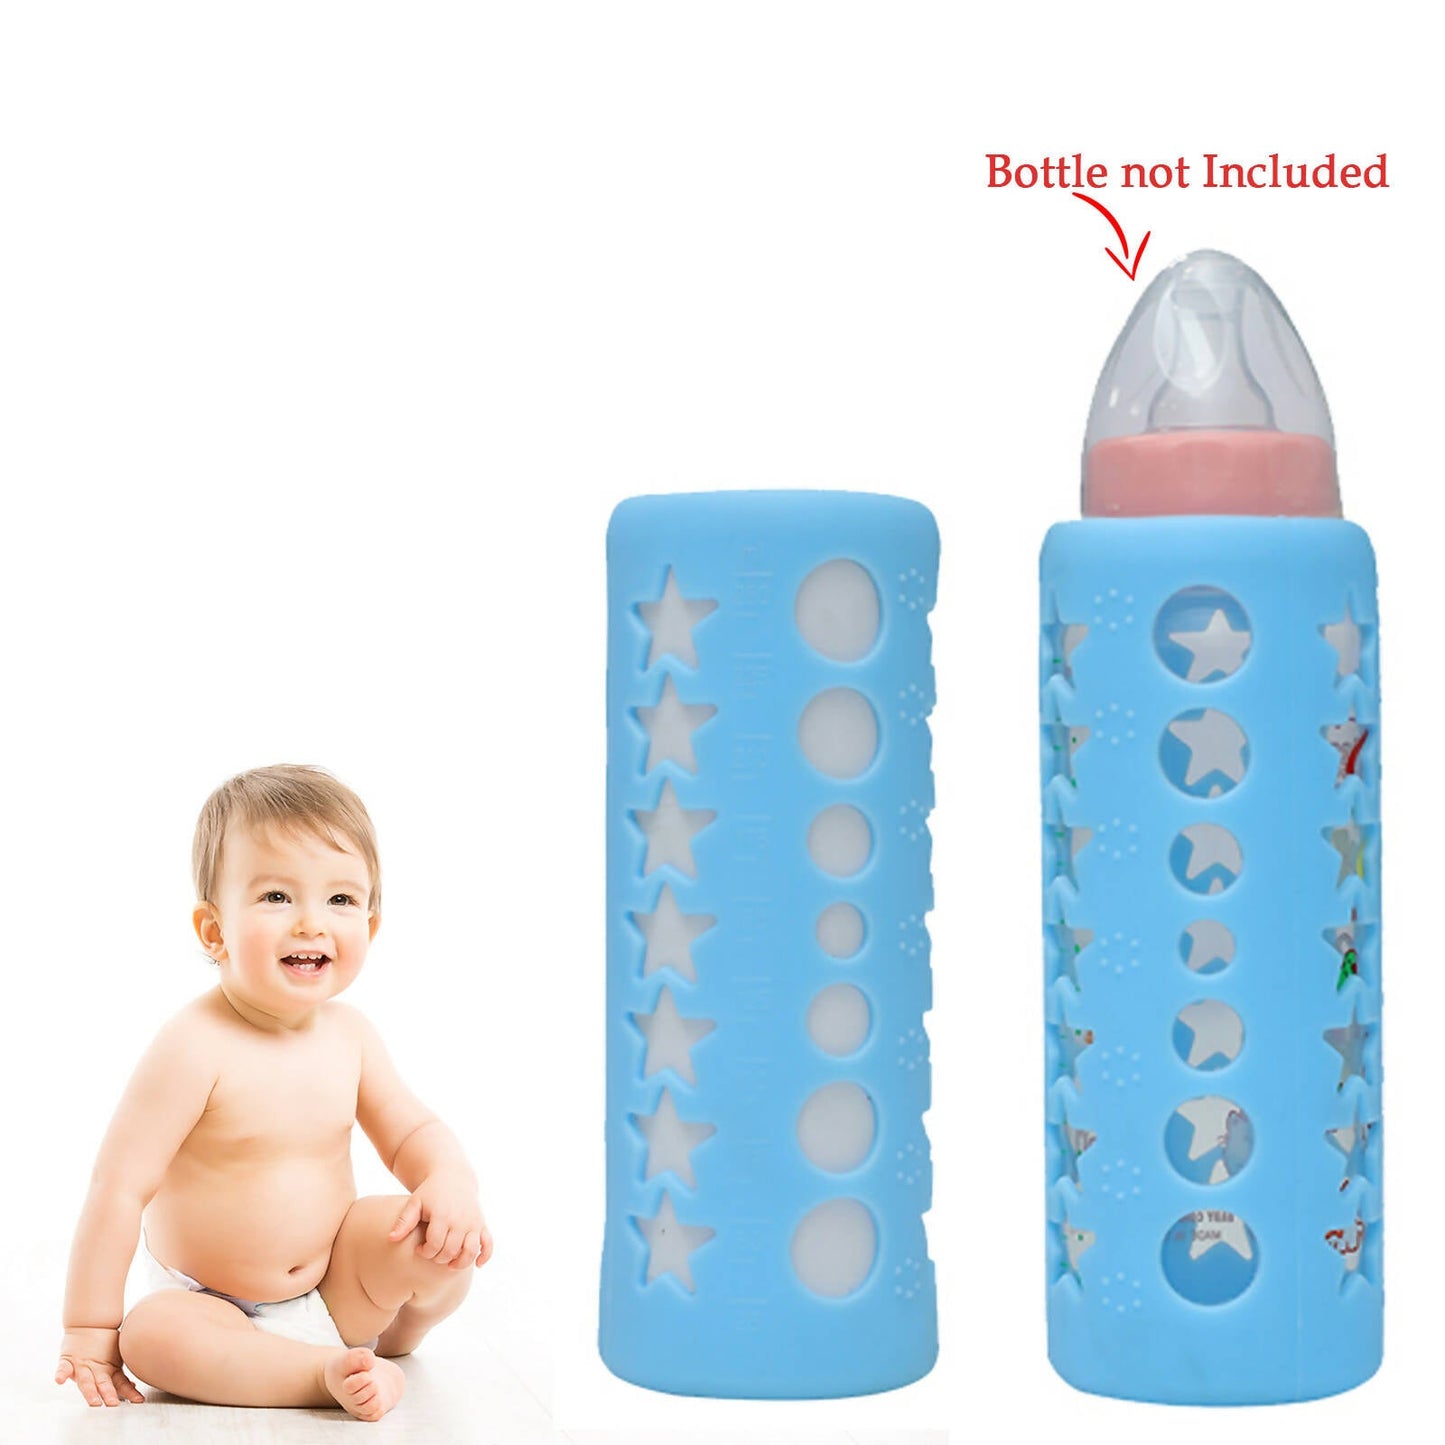 Safe-O-Kid Silicone Baby Feeding Bottle Cover Cum Sleeve for Insulated Protection 250mL- Blue